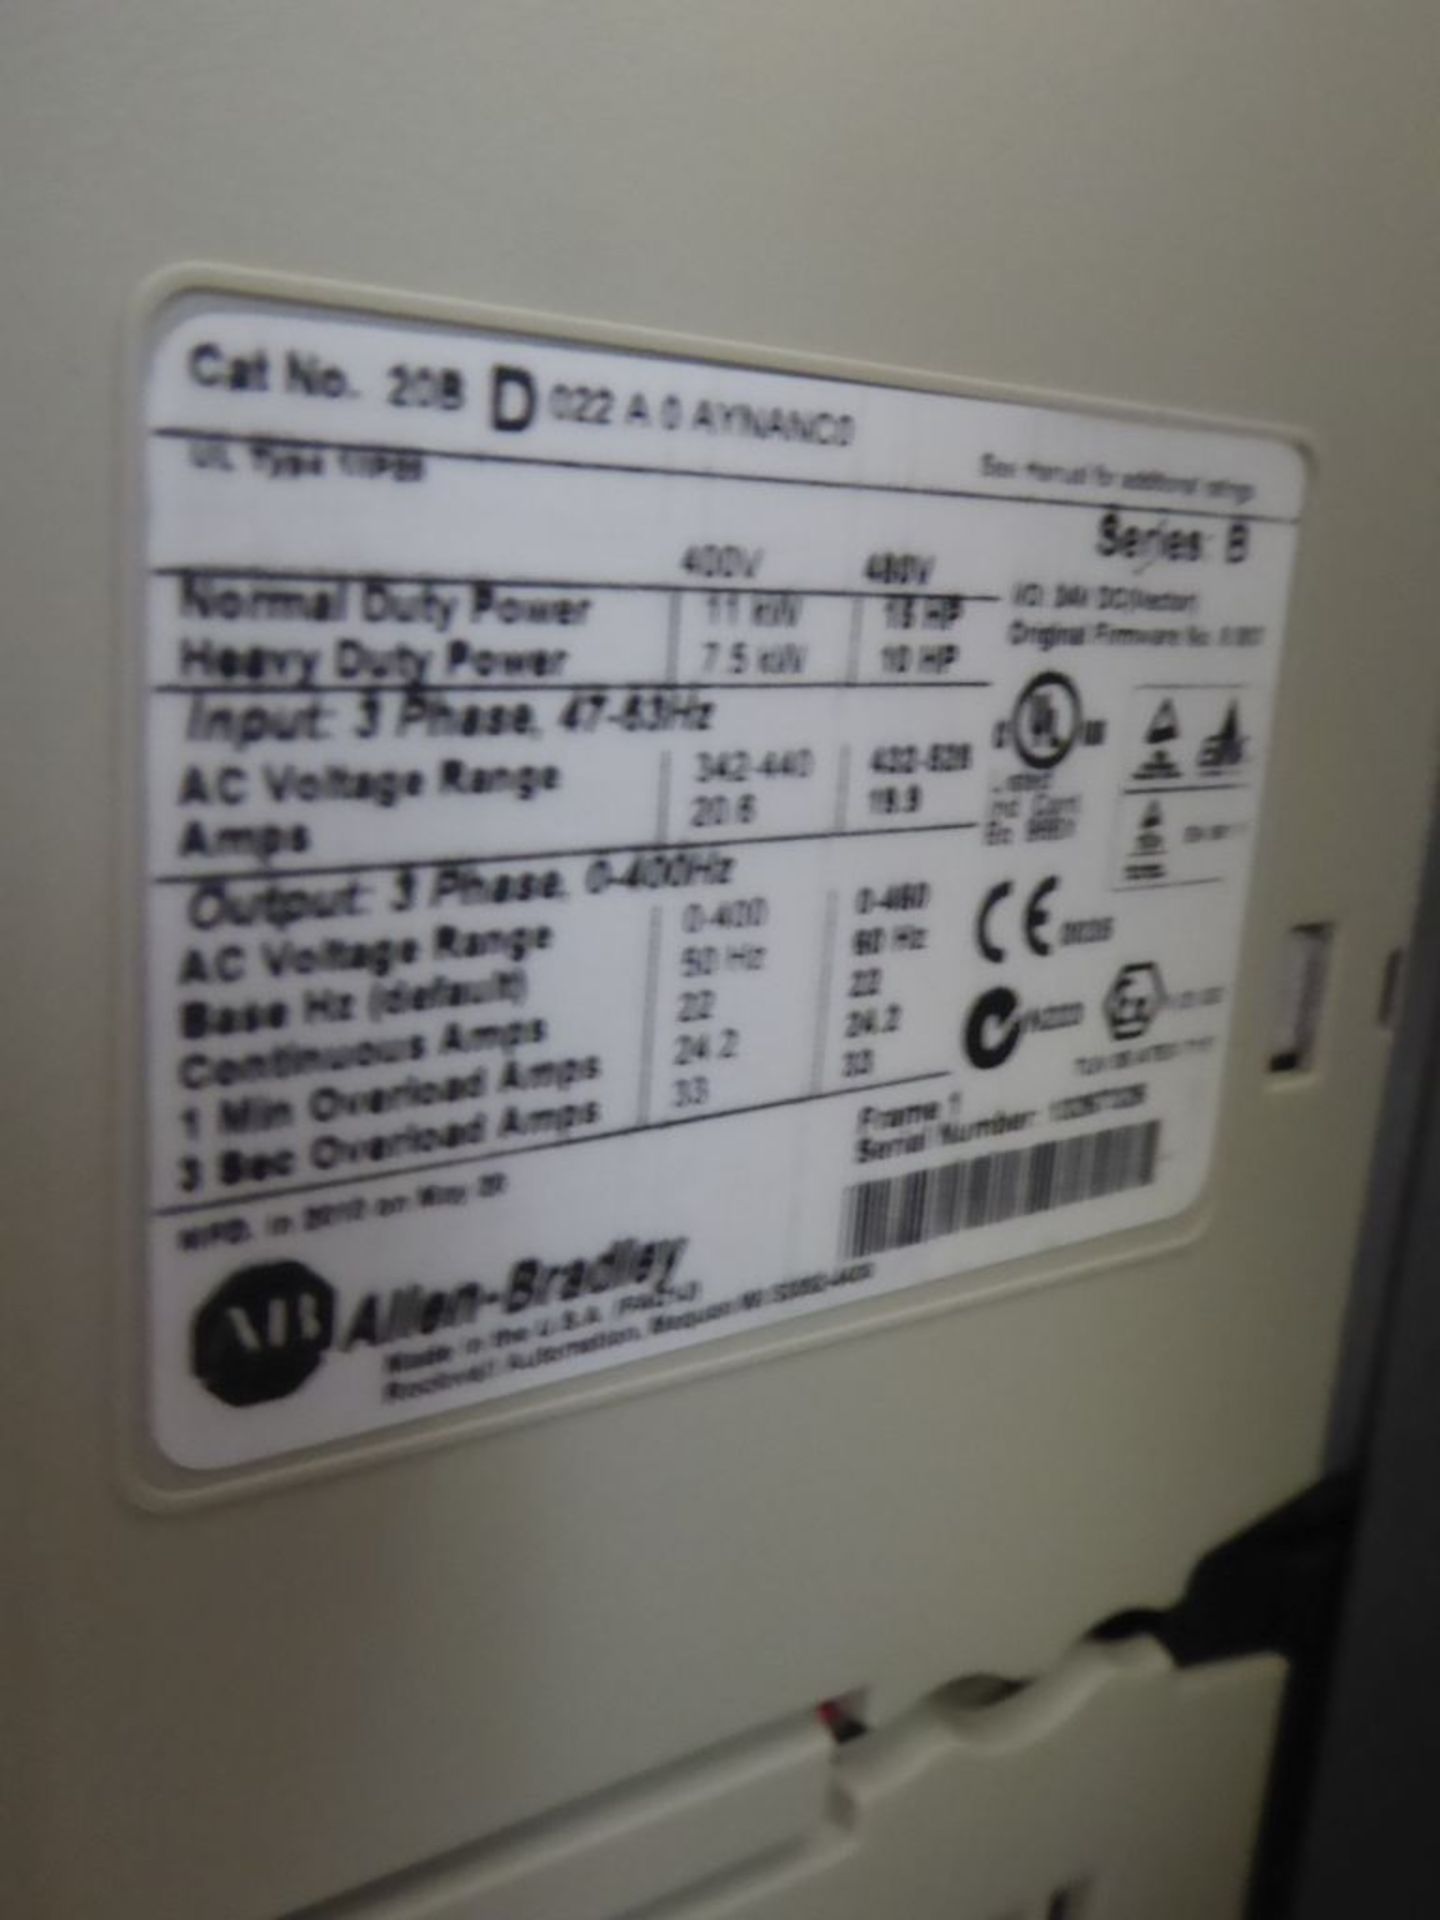 Control Panel with (2) Allen Bradley Powerflex 700 Drives - Image 10 of 42